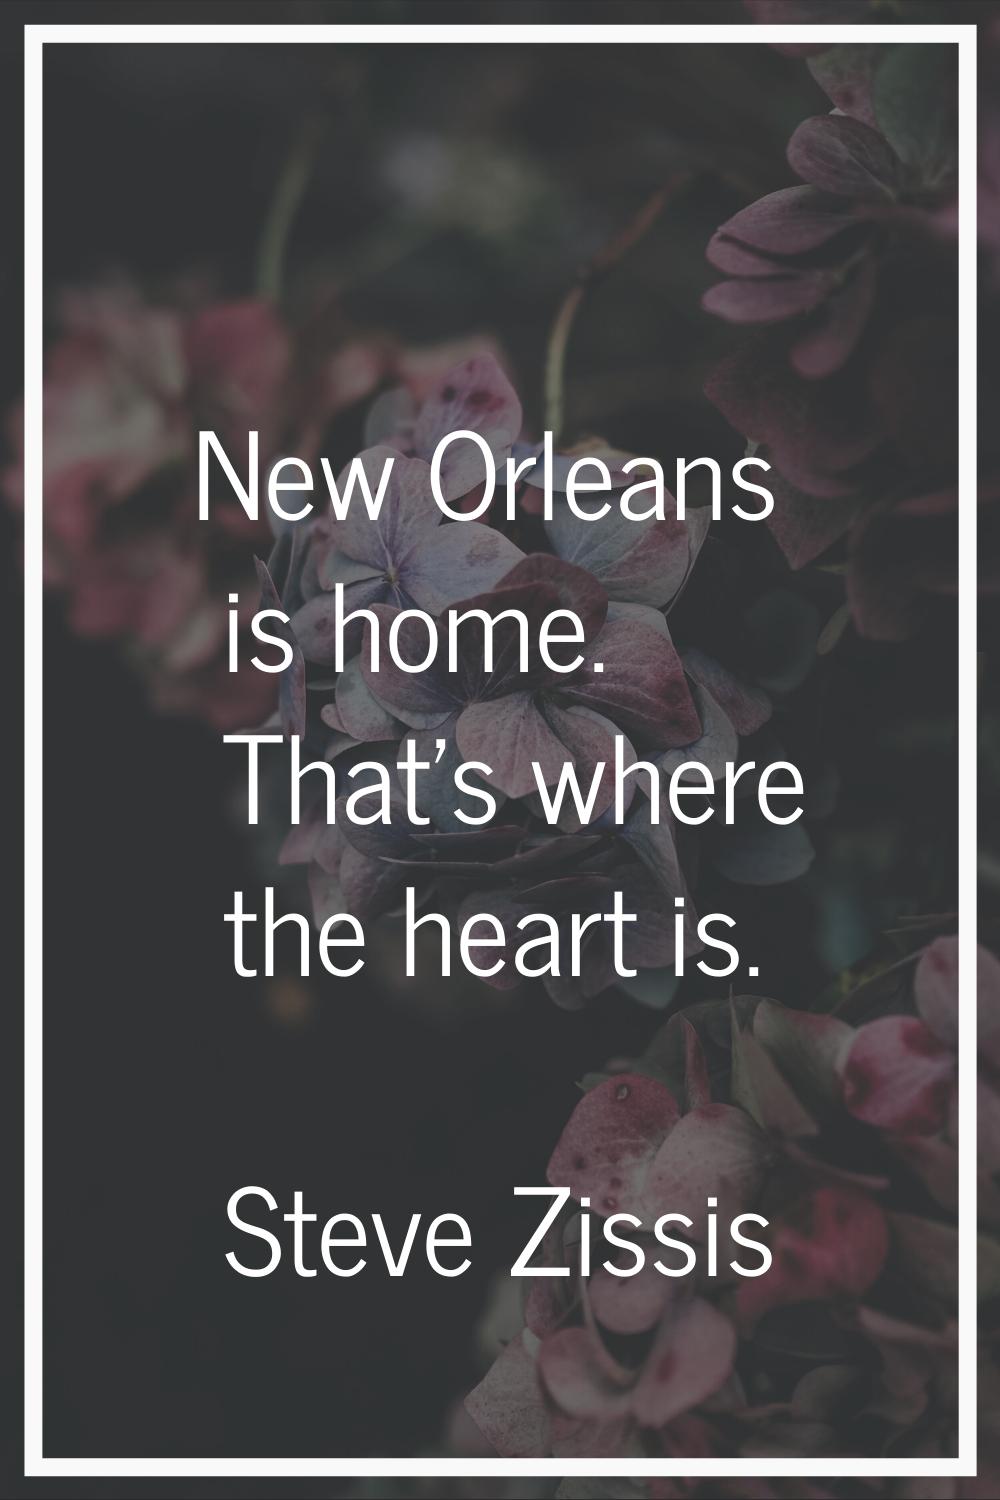 New Orleans is home. That's where the heart is.